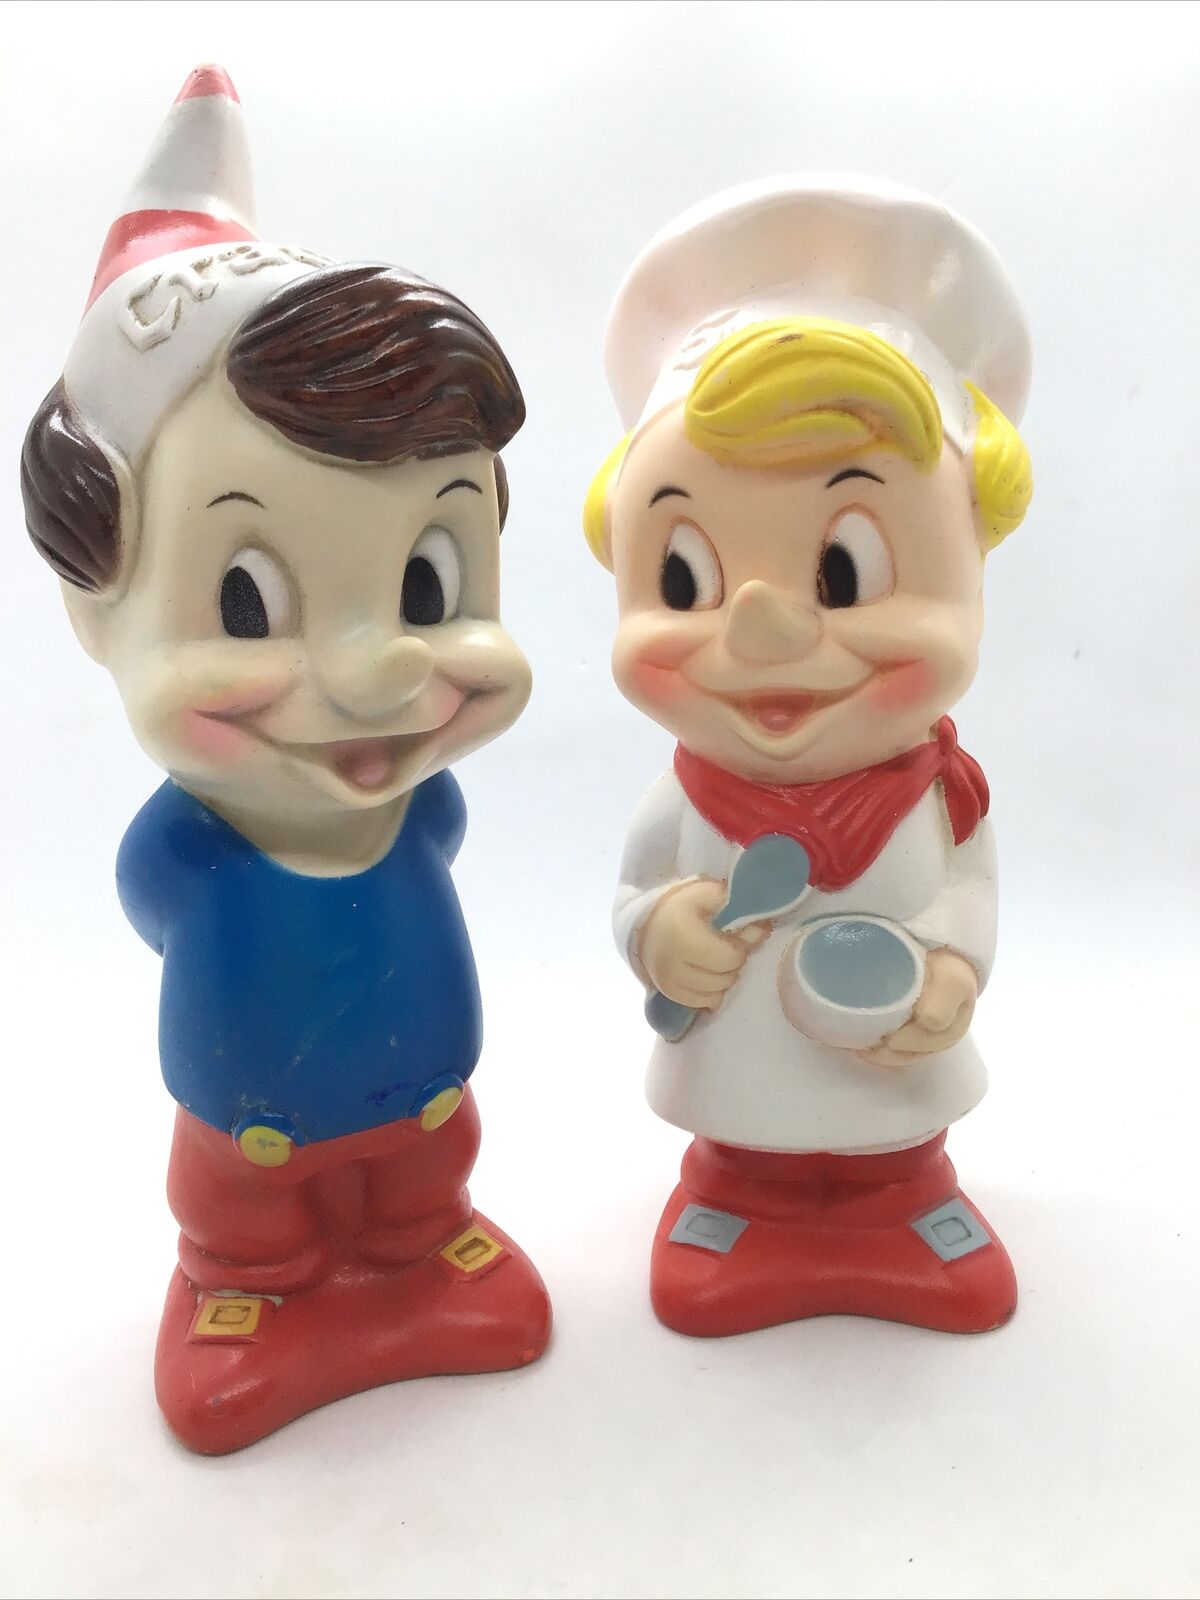 Lot Of 2 Vintage Rubber Squeak Toy Of Rice Krispies & Snap, Crackle 8" Kellogg’s